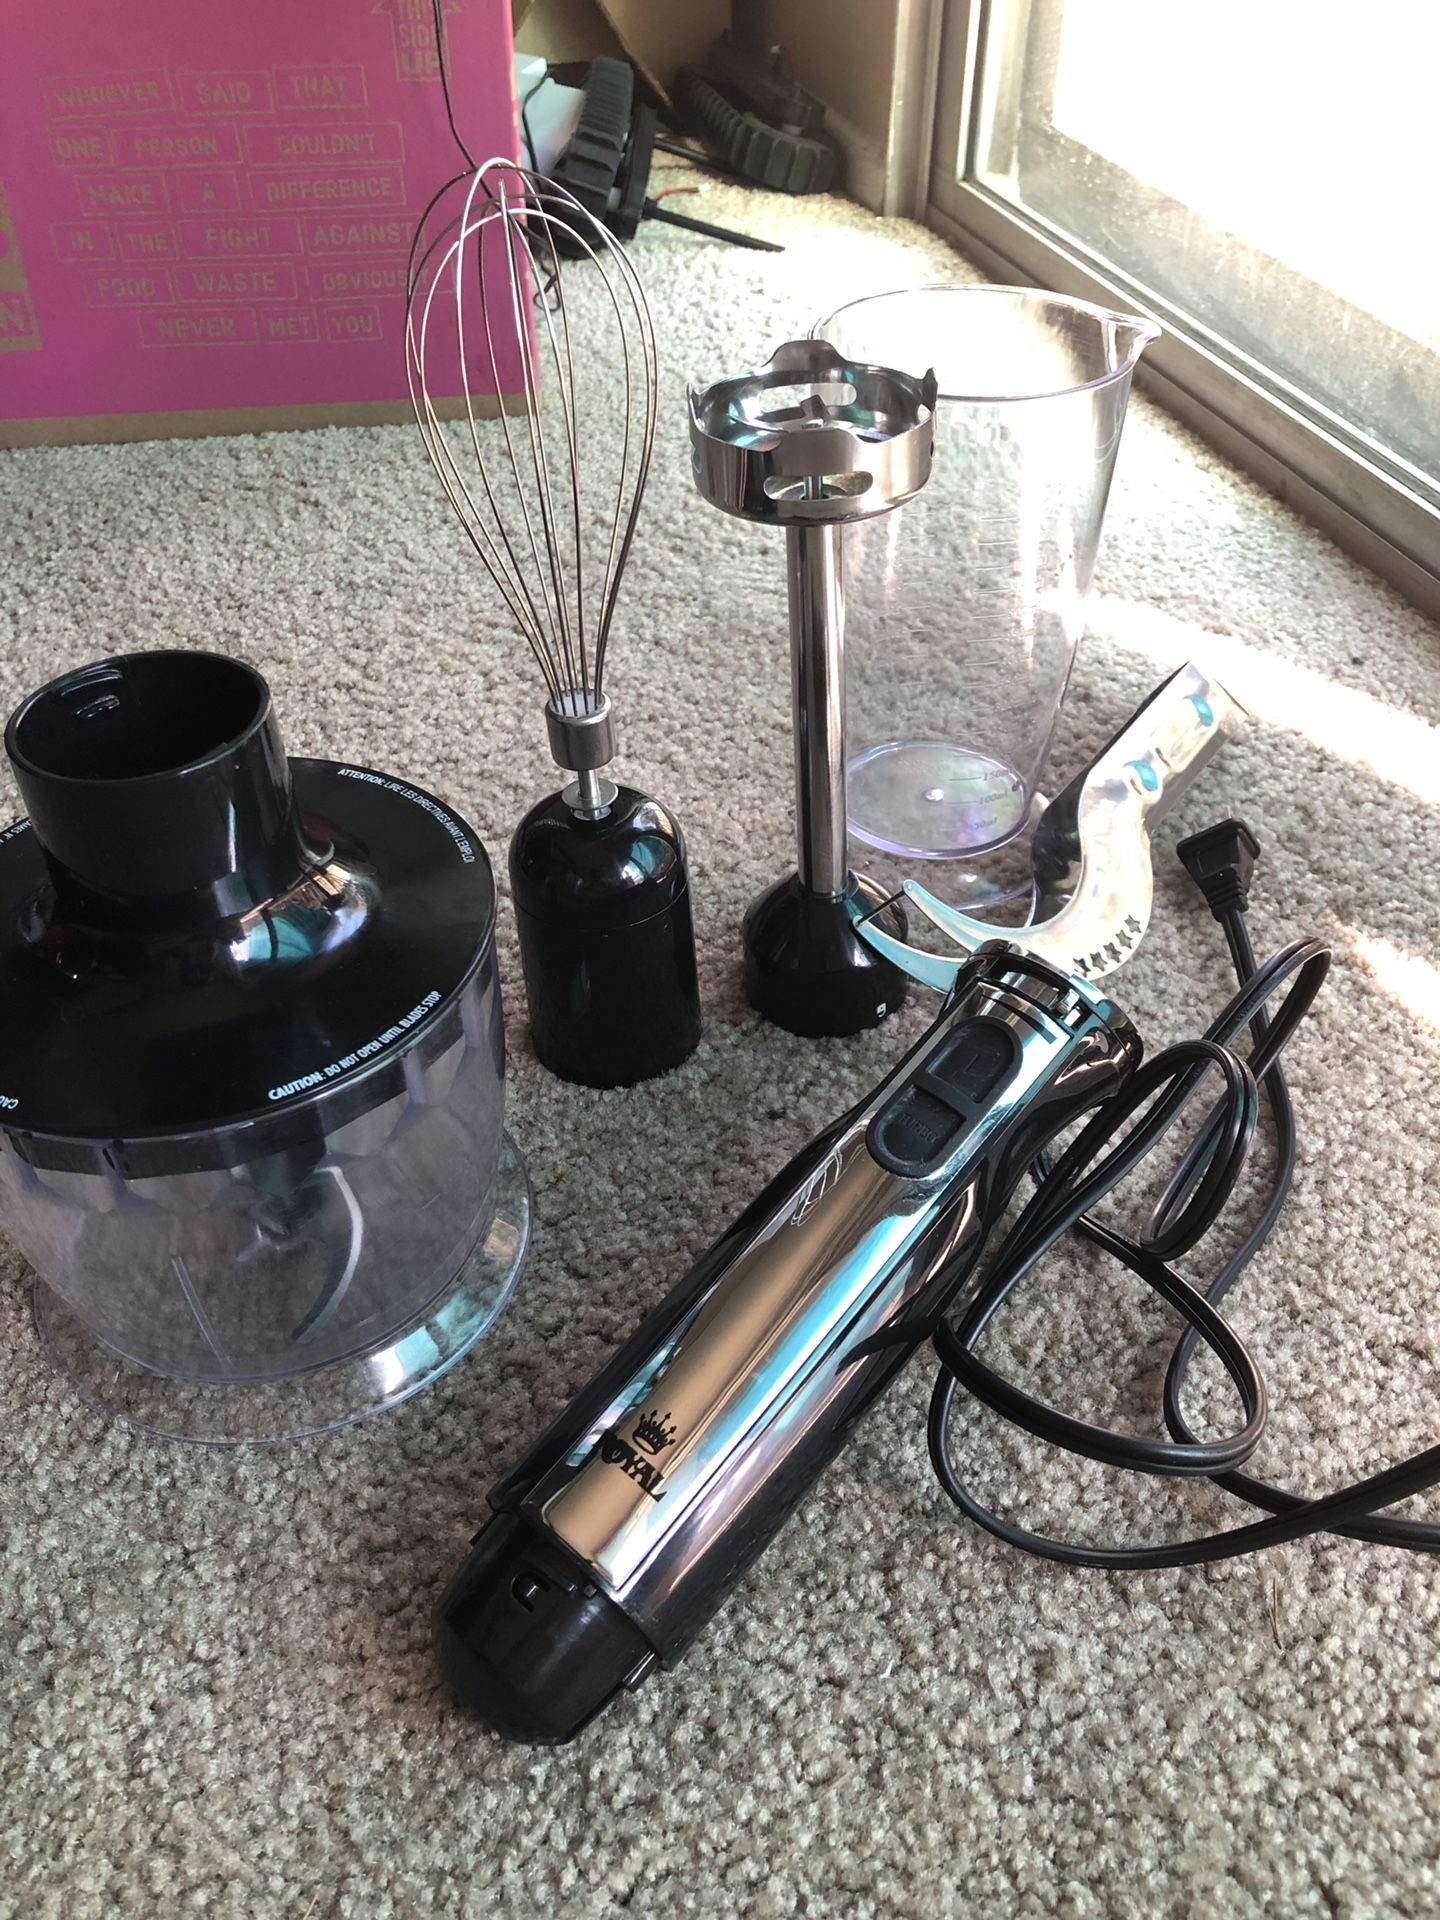 Royal hand blender set (With food processor, hand mixer, immersion blender, whisk, Tongs etc)